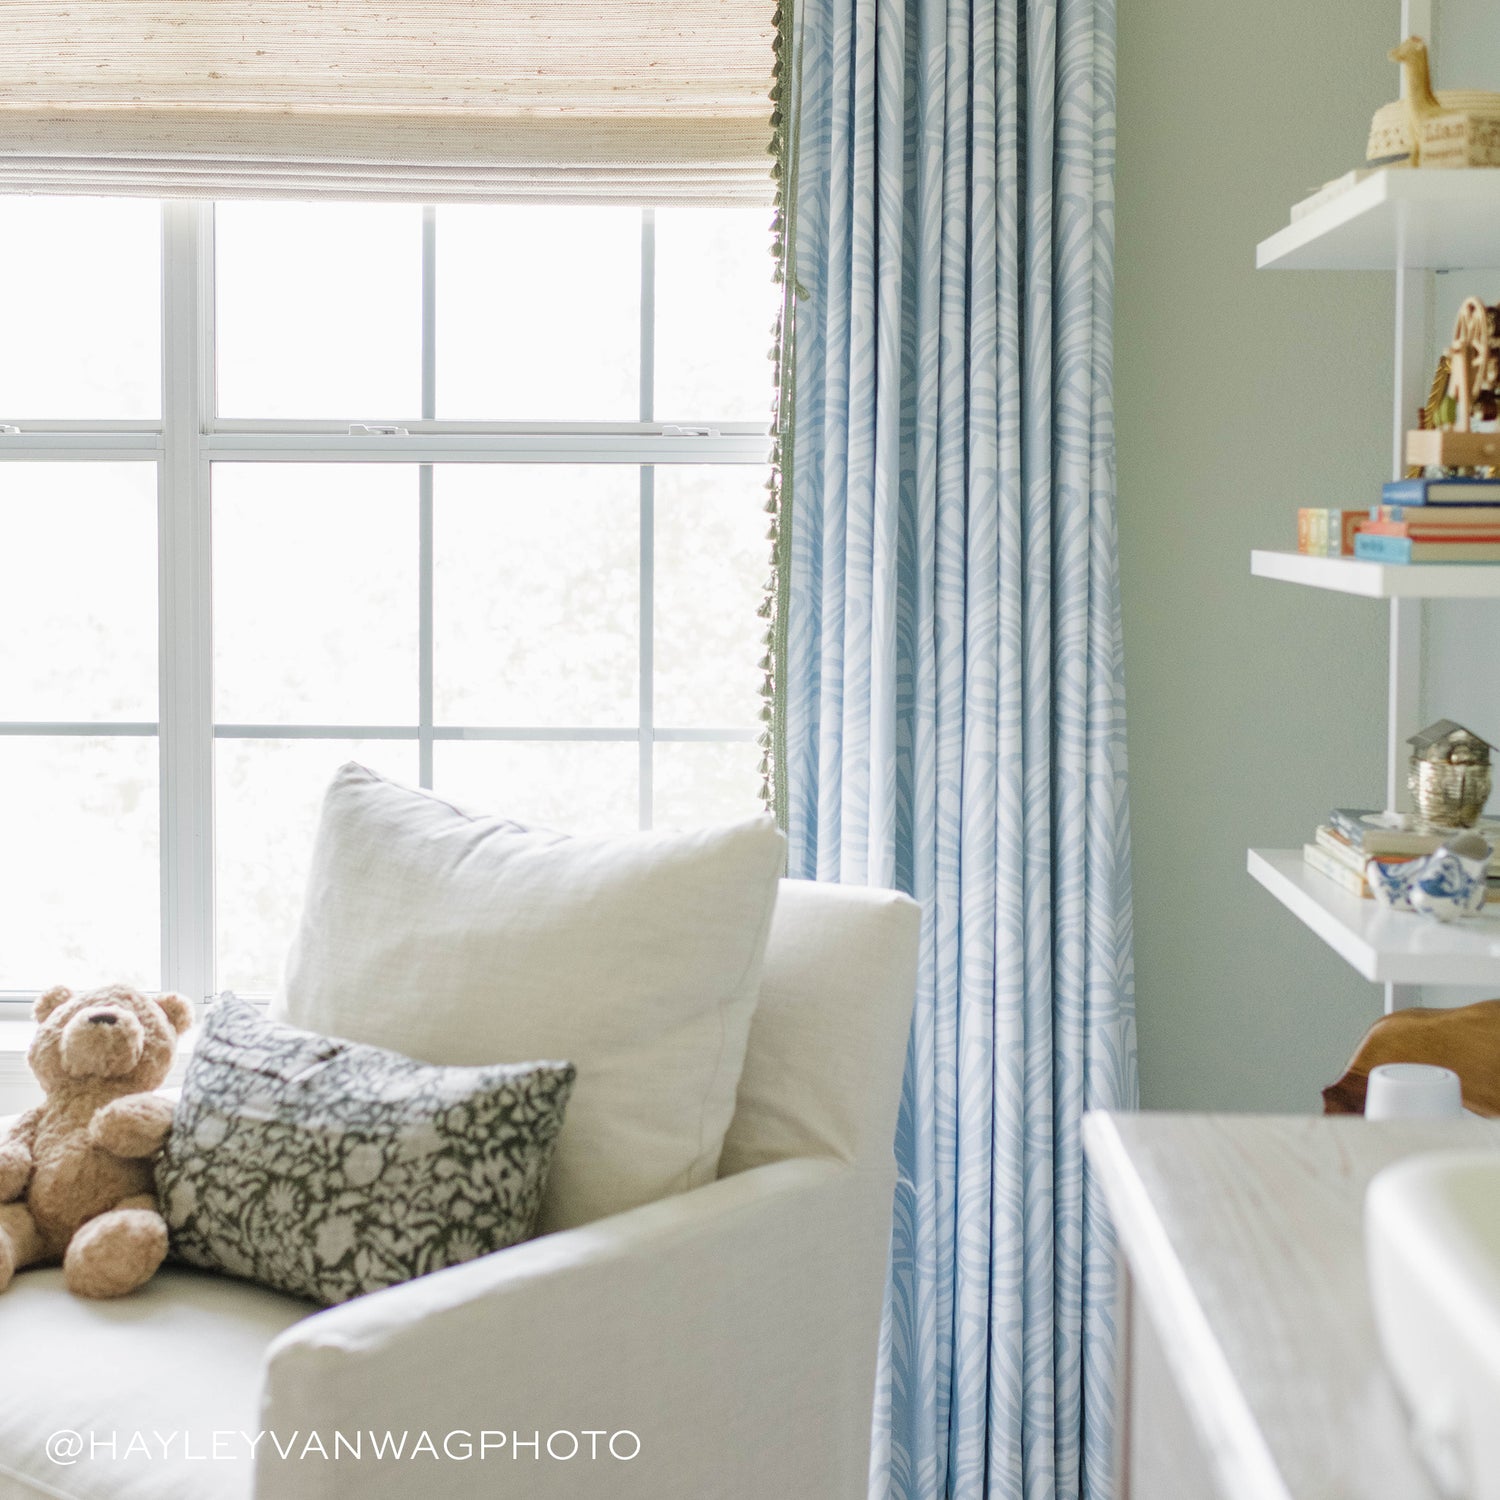 Window close-up with white sofa chair and sky blue palm printed curtains. Photo taken by Hayley Van Wageningen